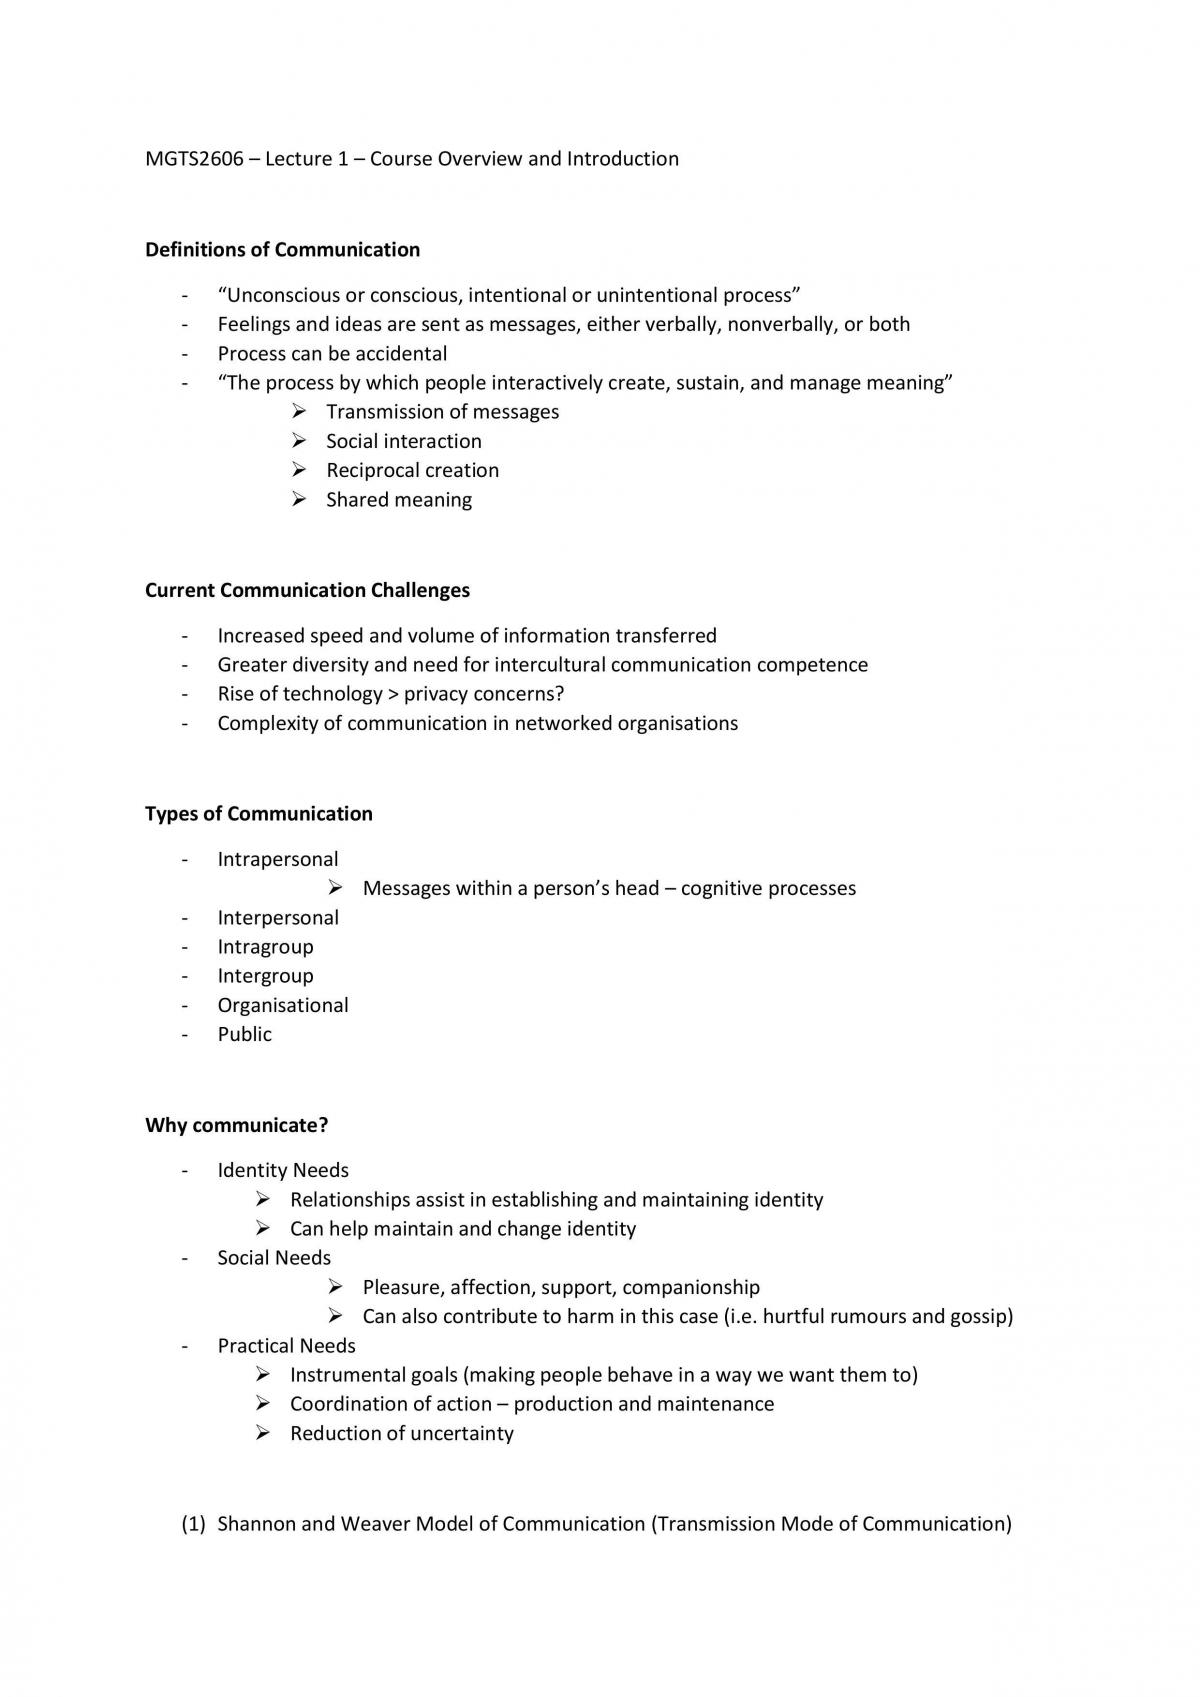 Complete Comprehensive Notes on MGTS2604 - Managerial Skills and Communication - Page 2